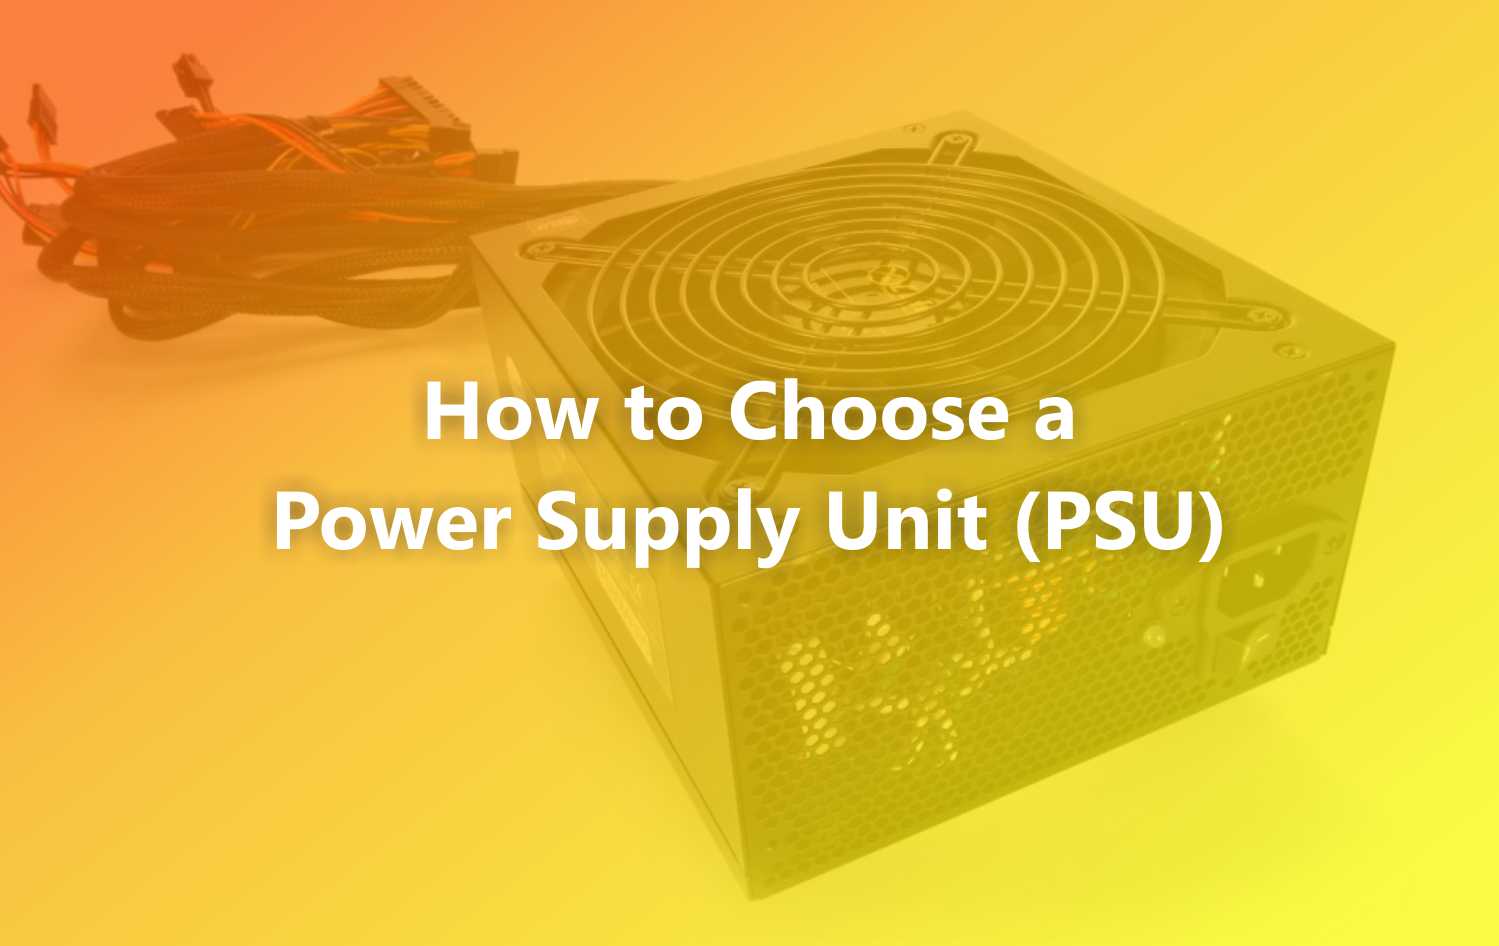 How to Choose a Good Power Supply Unit (PSU)